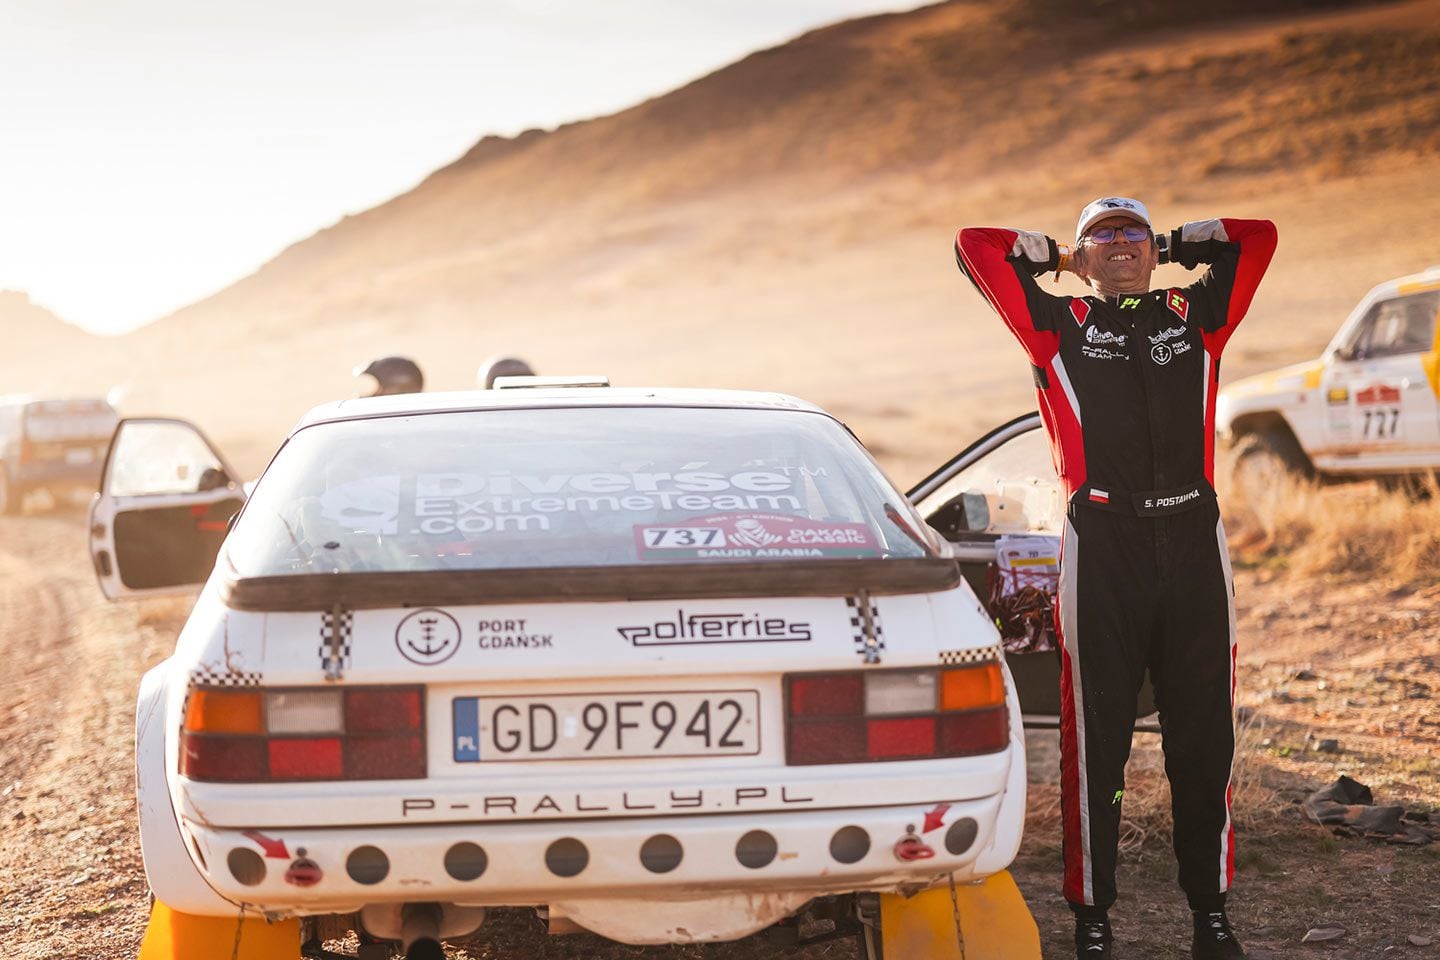 Dakar Classic brings out Porsches of a different sort, like Tomasz Staniszewski and Stanislaw Postawka’s P-Rally Porsche 944 (or perhaps 924?), Stage 9.